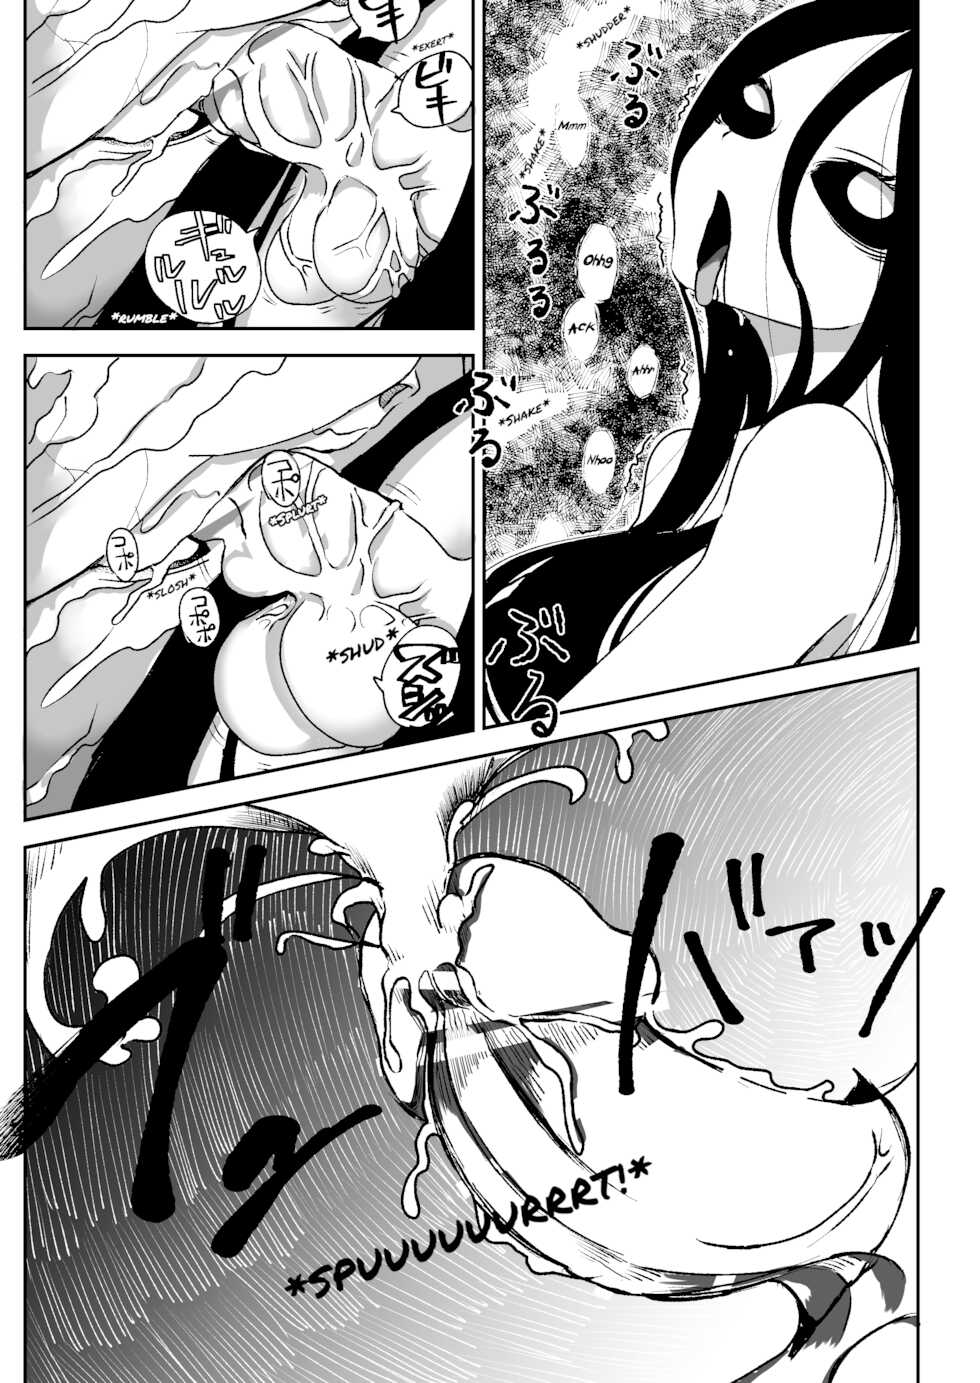 [Shimanami (Archipelago)] Dead End House Anthology - (The Chandelier/The Exorcist/Spinoff Expansion 1&2) [Ongoing] - Page 23